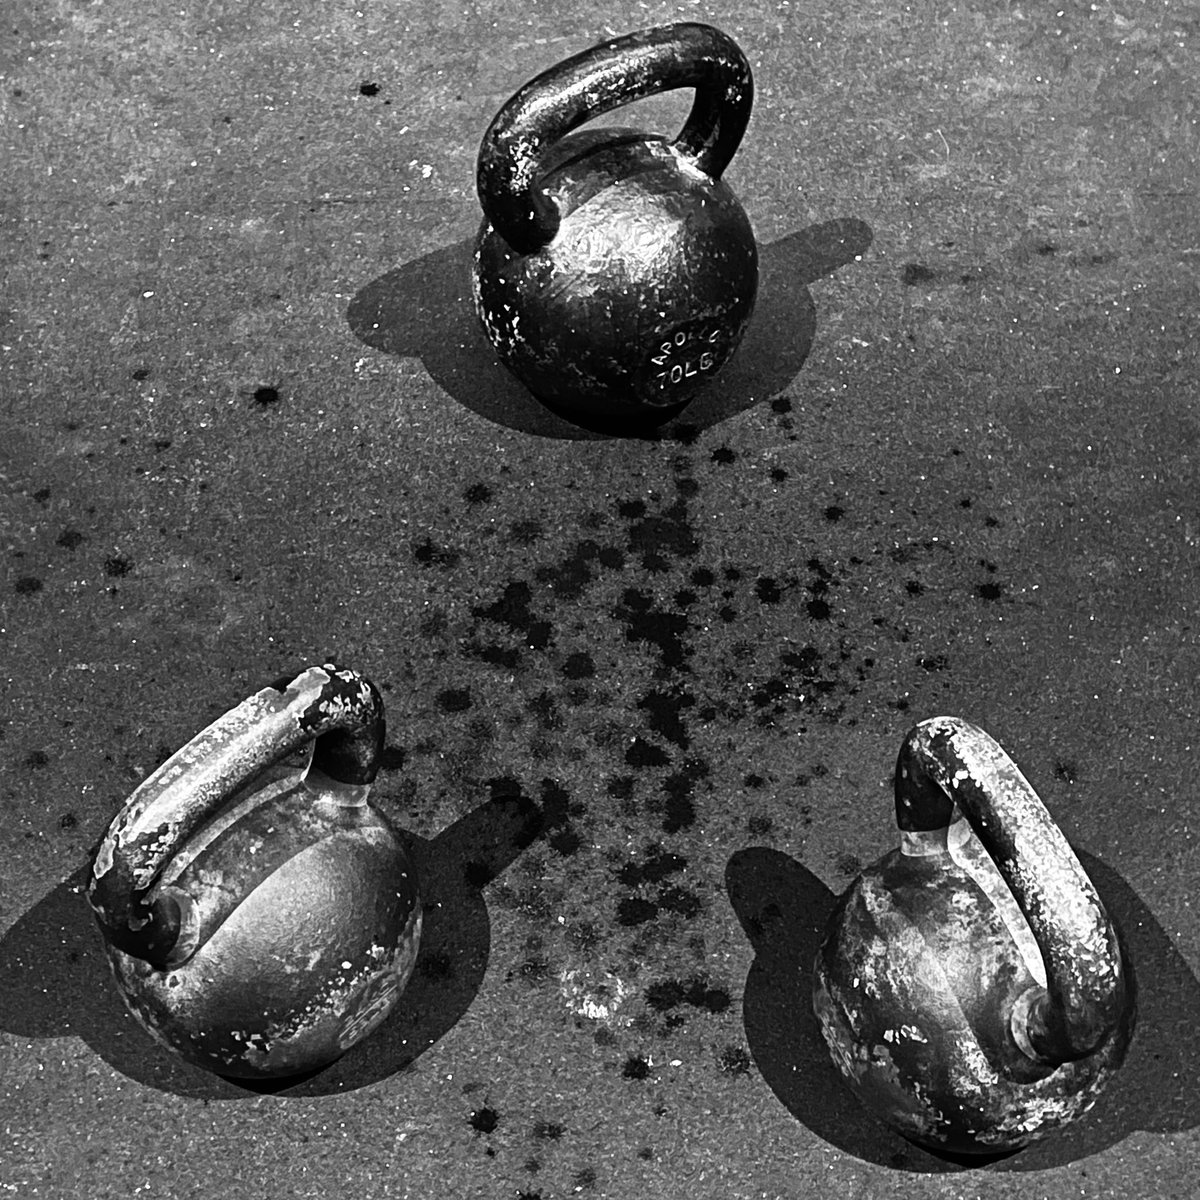 Aftermath. The Metal.